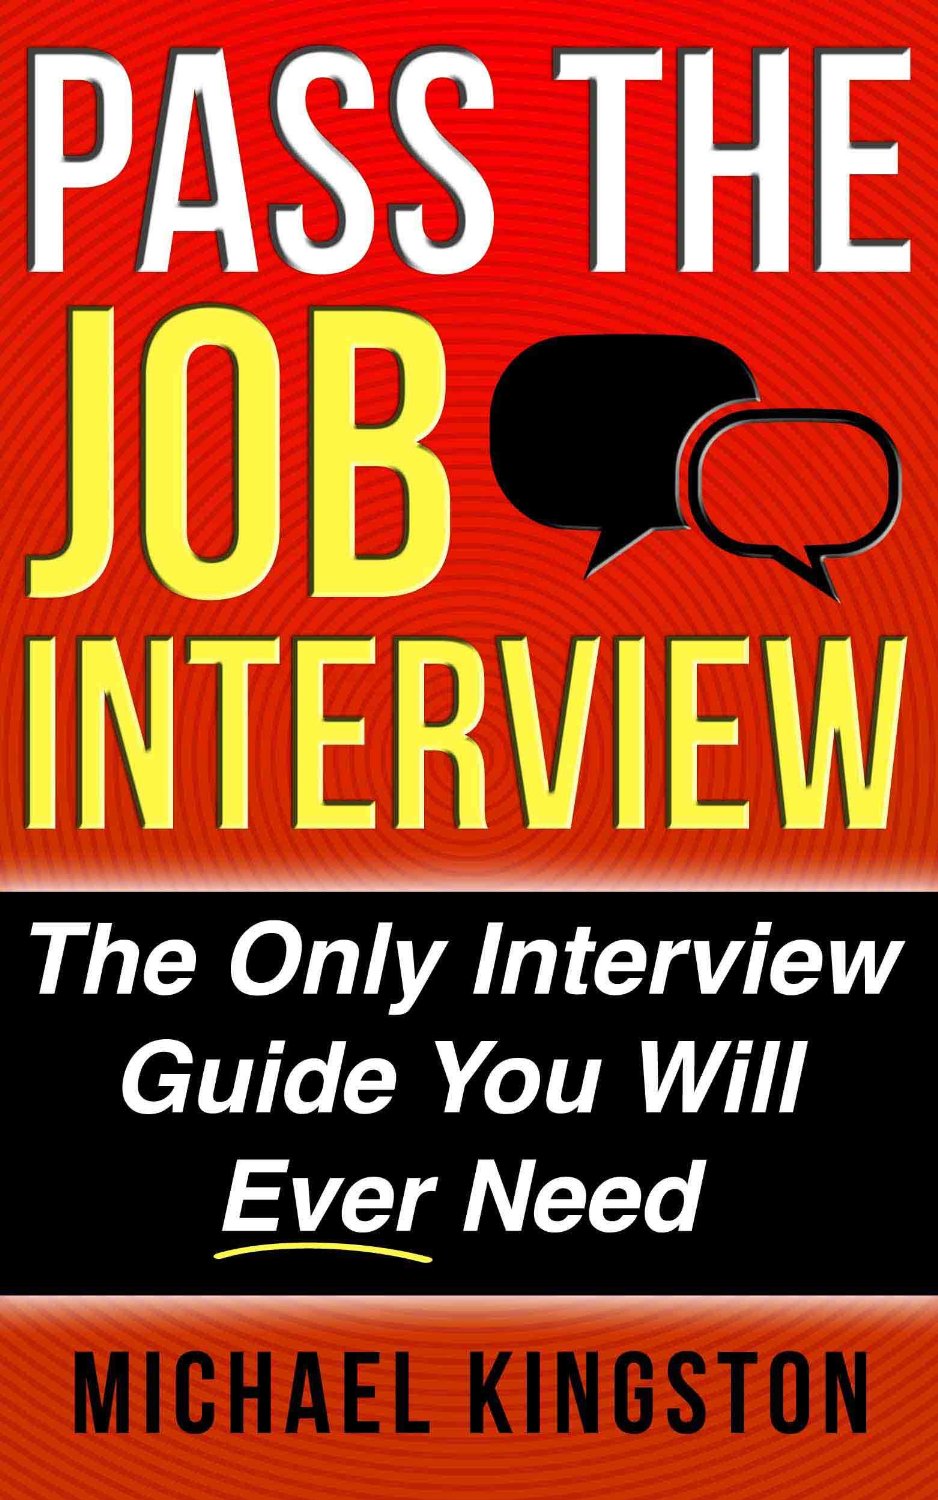 Pass The Job Interview: The Only Interview Guide You Will Ever Need by Michael Kingston